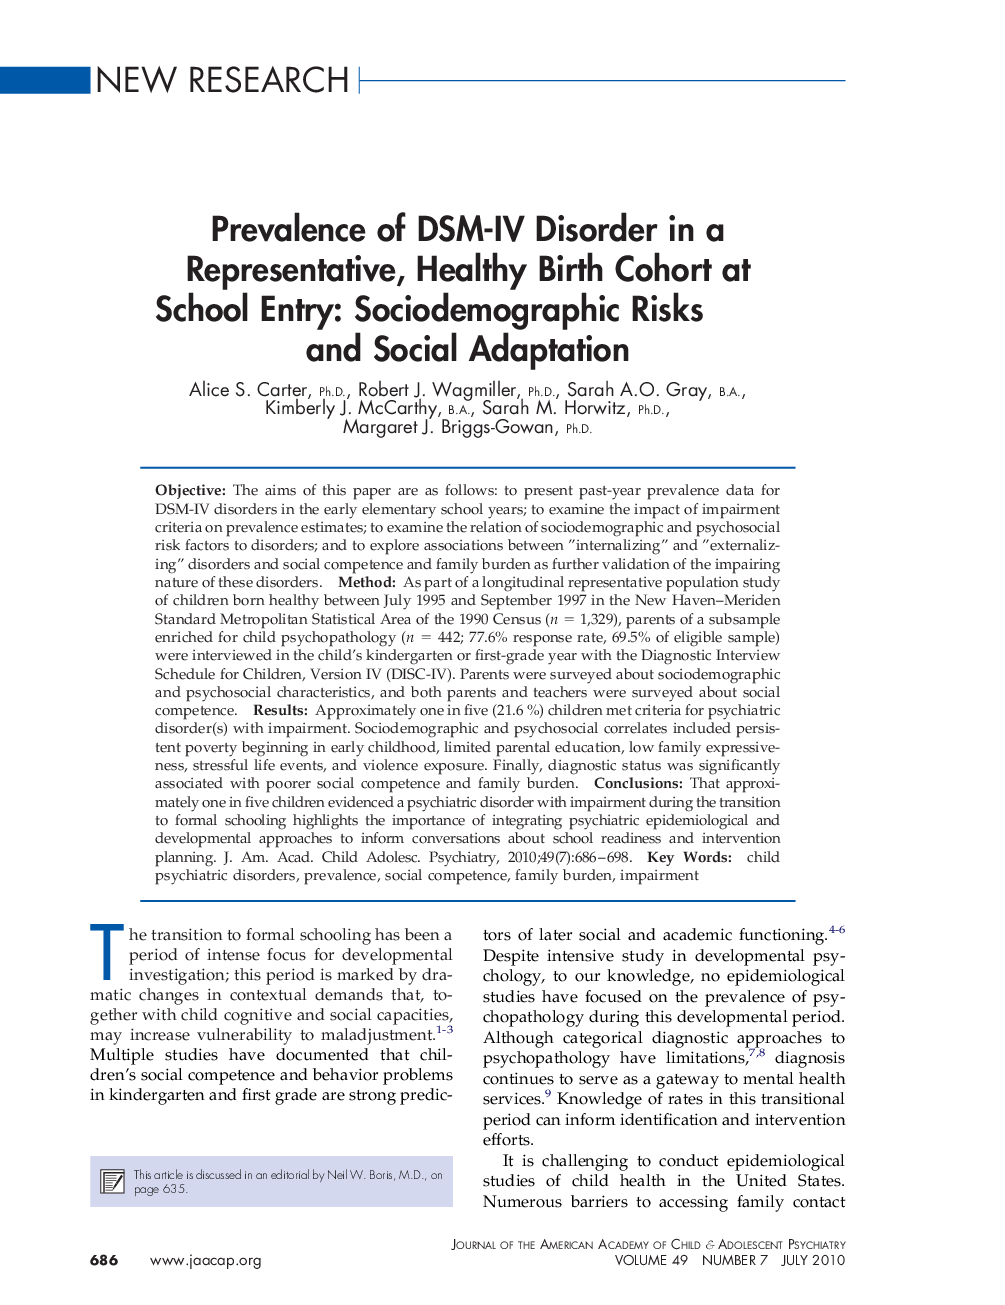 Prevalence of DSM-IV Disorder in a Representative, Healthy Birth Cohort at School Entry: Sociodemographic Risks and Social Adaptation 